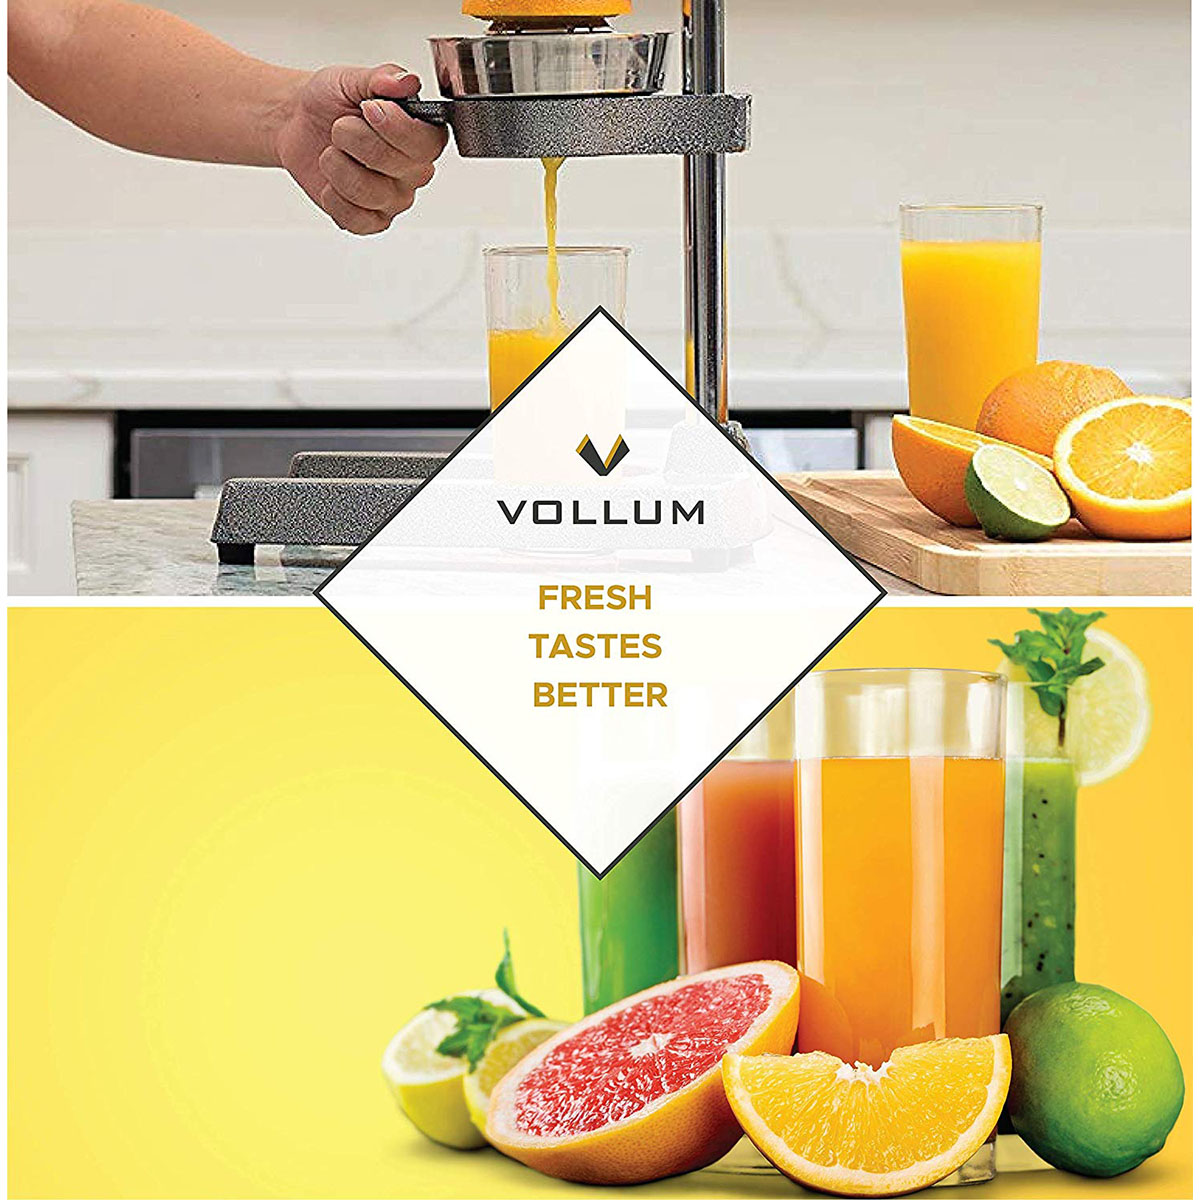 Vollum Manual Stainless Steel Extra Large Fruit Juicer image 3